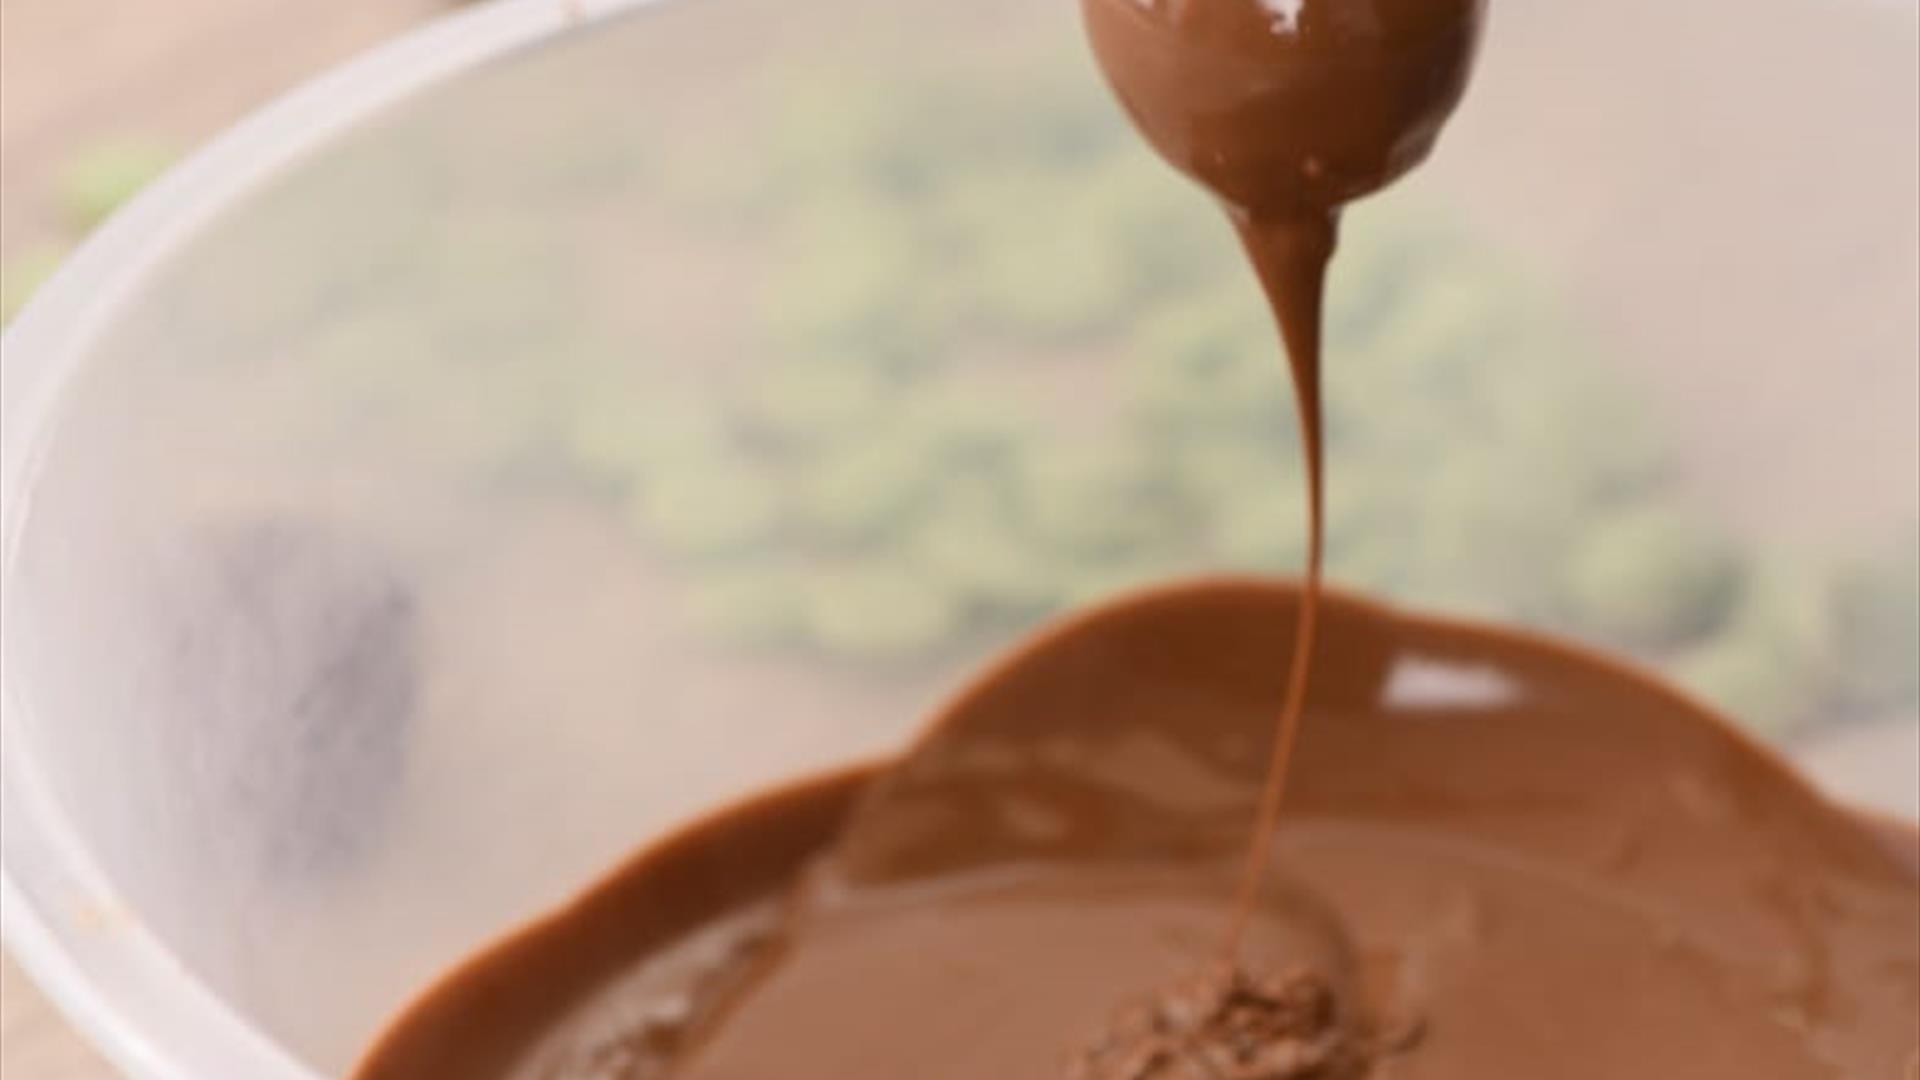 Dipping a handmade truffle in a bowl of melted chocolate